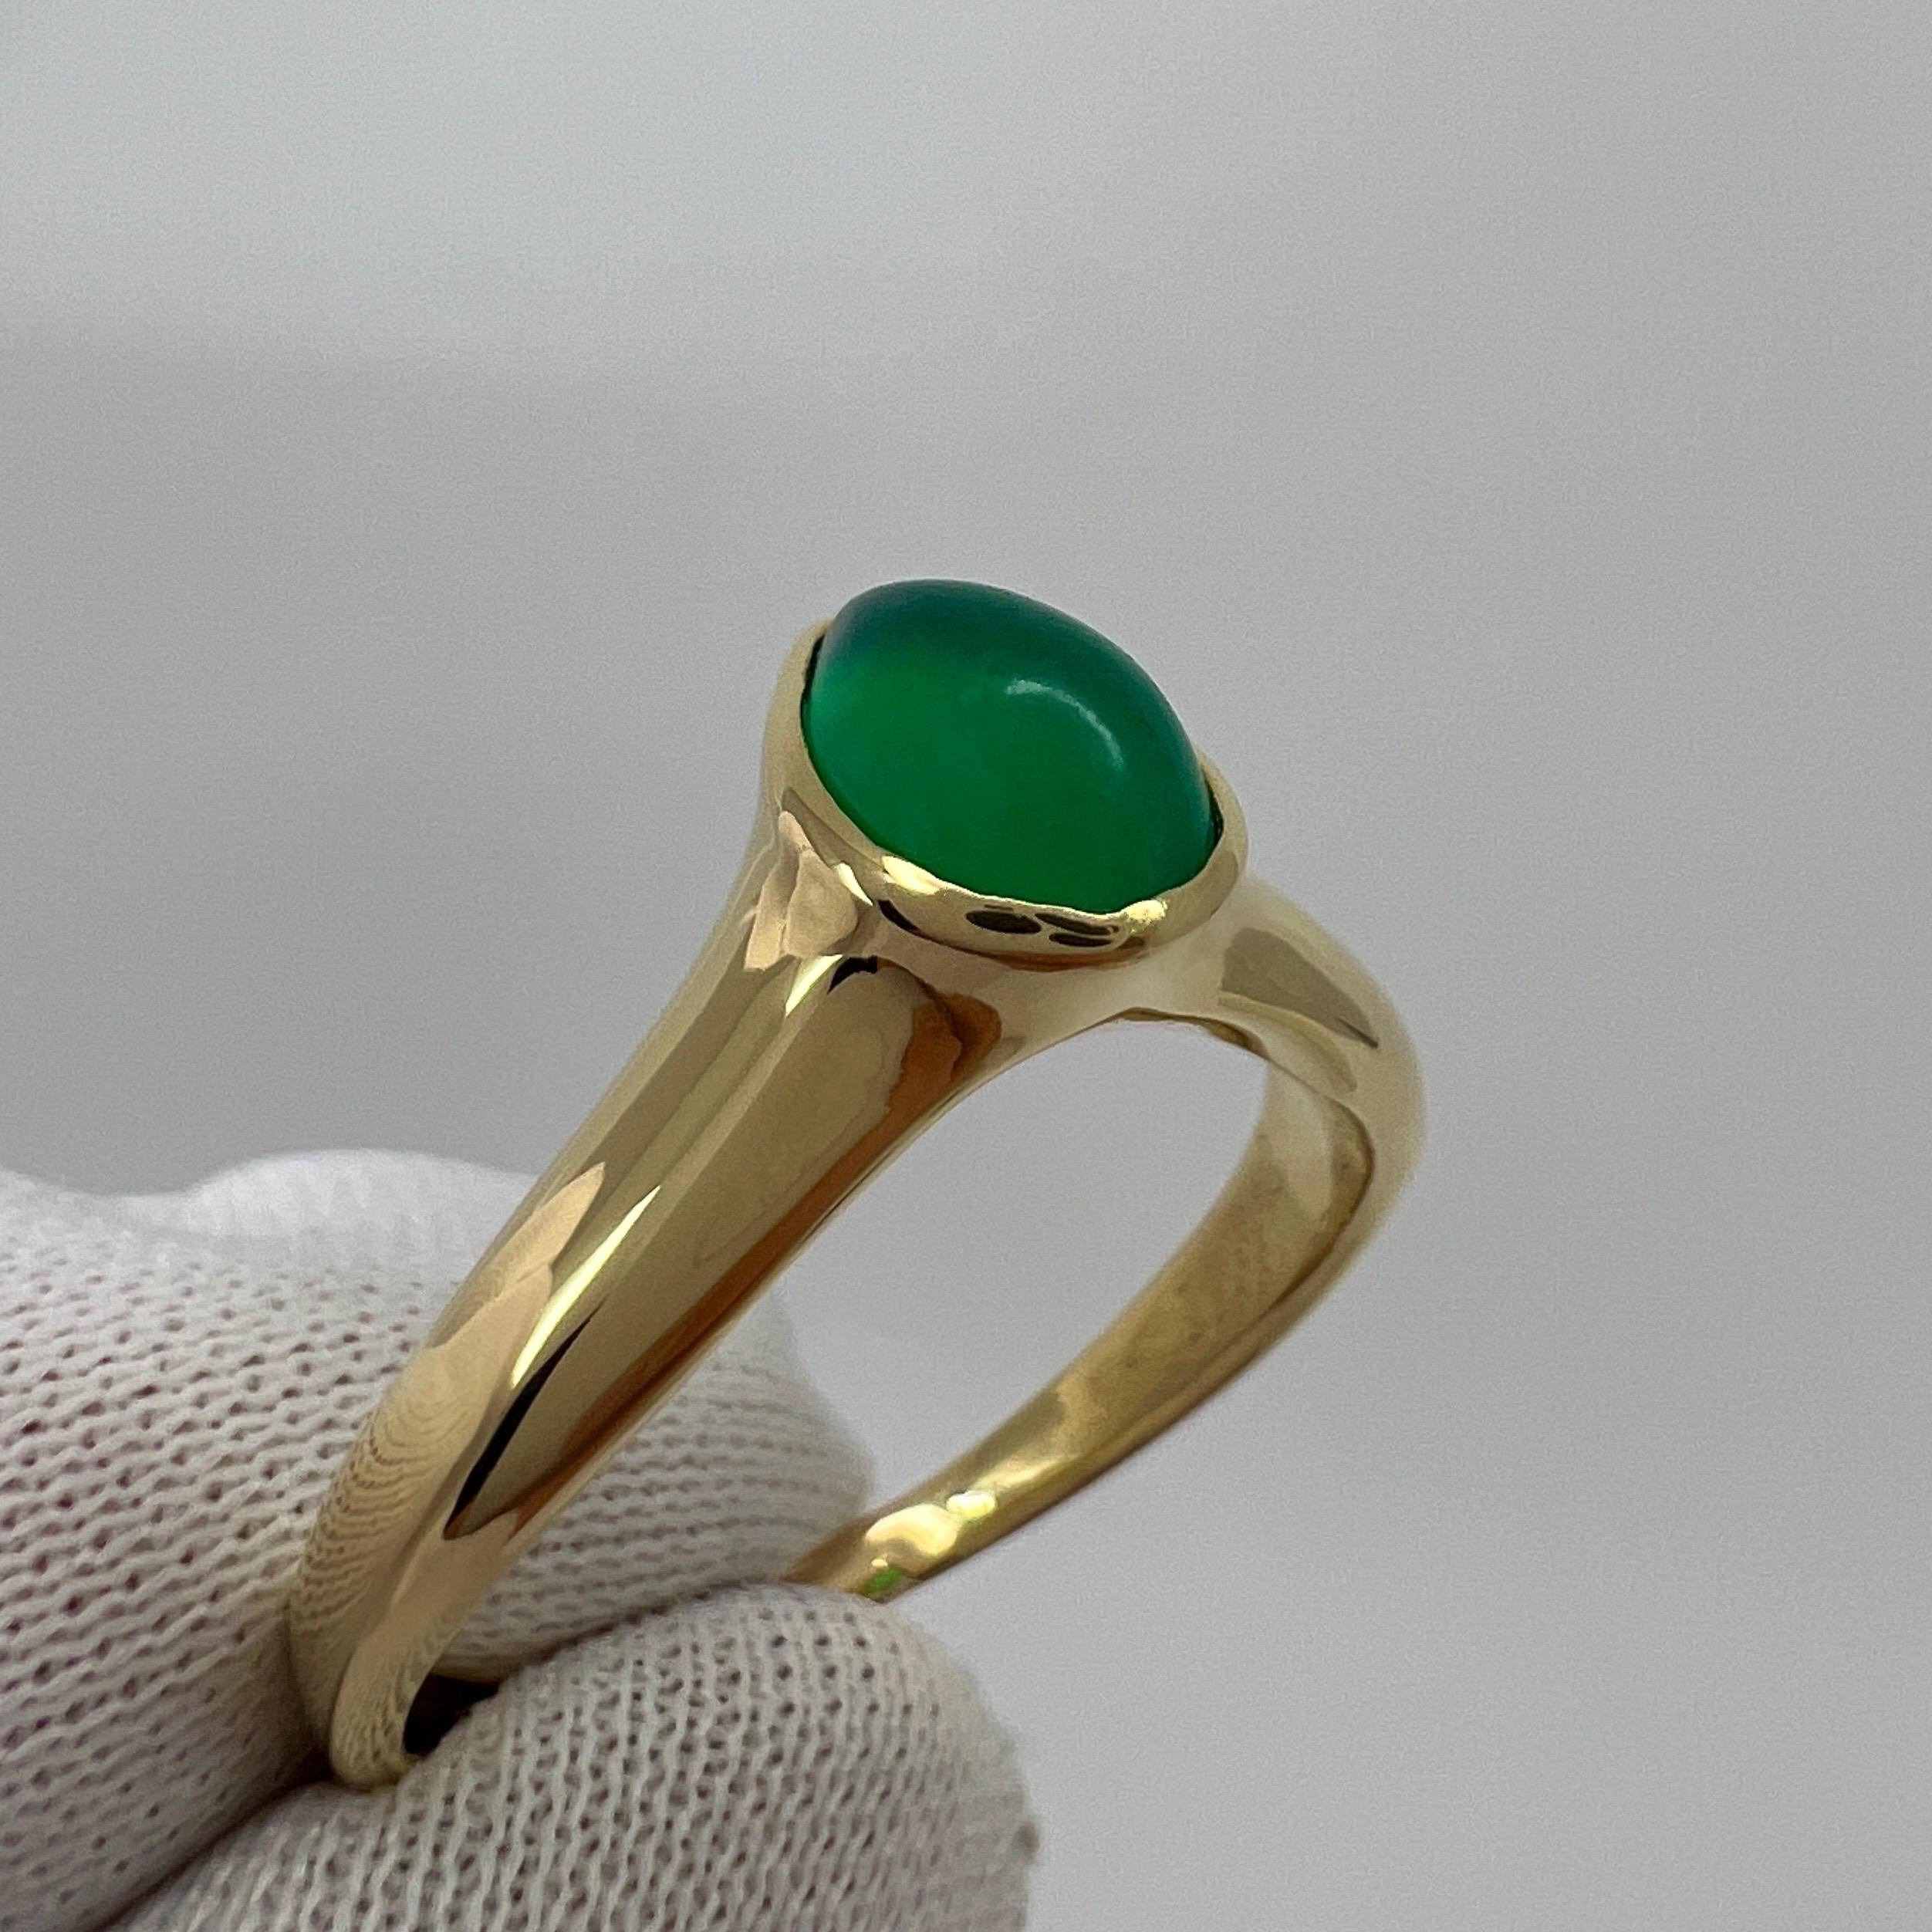 Rare Vintage Van Cleef & Arpels Green Chalcedony Pear Cut 18k Yellow Gold Ring For Sale 3